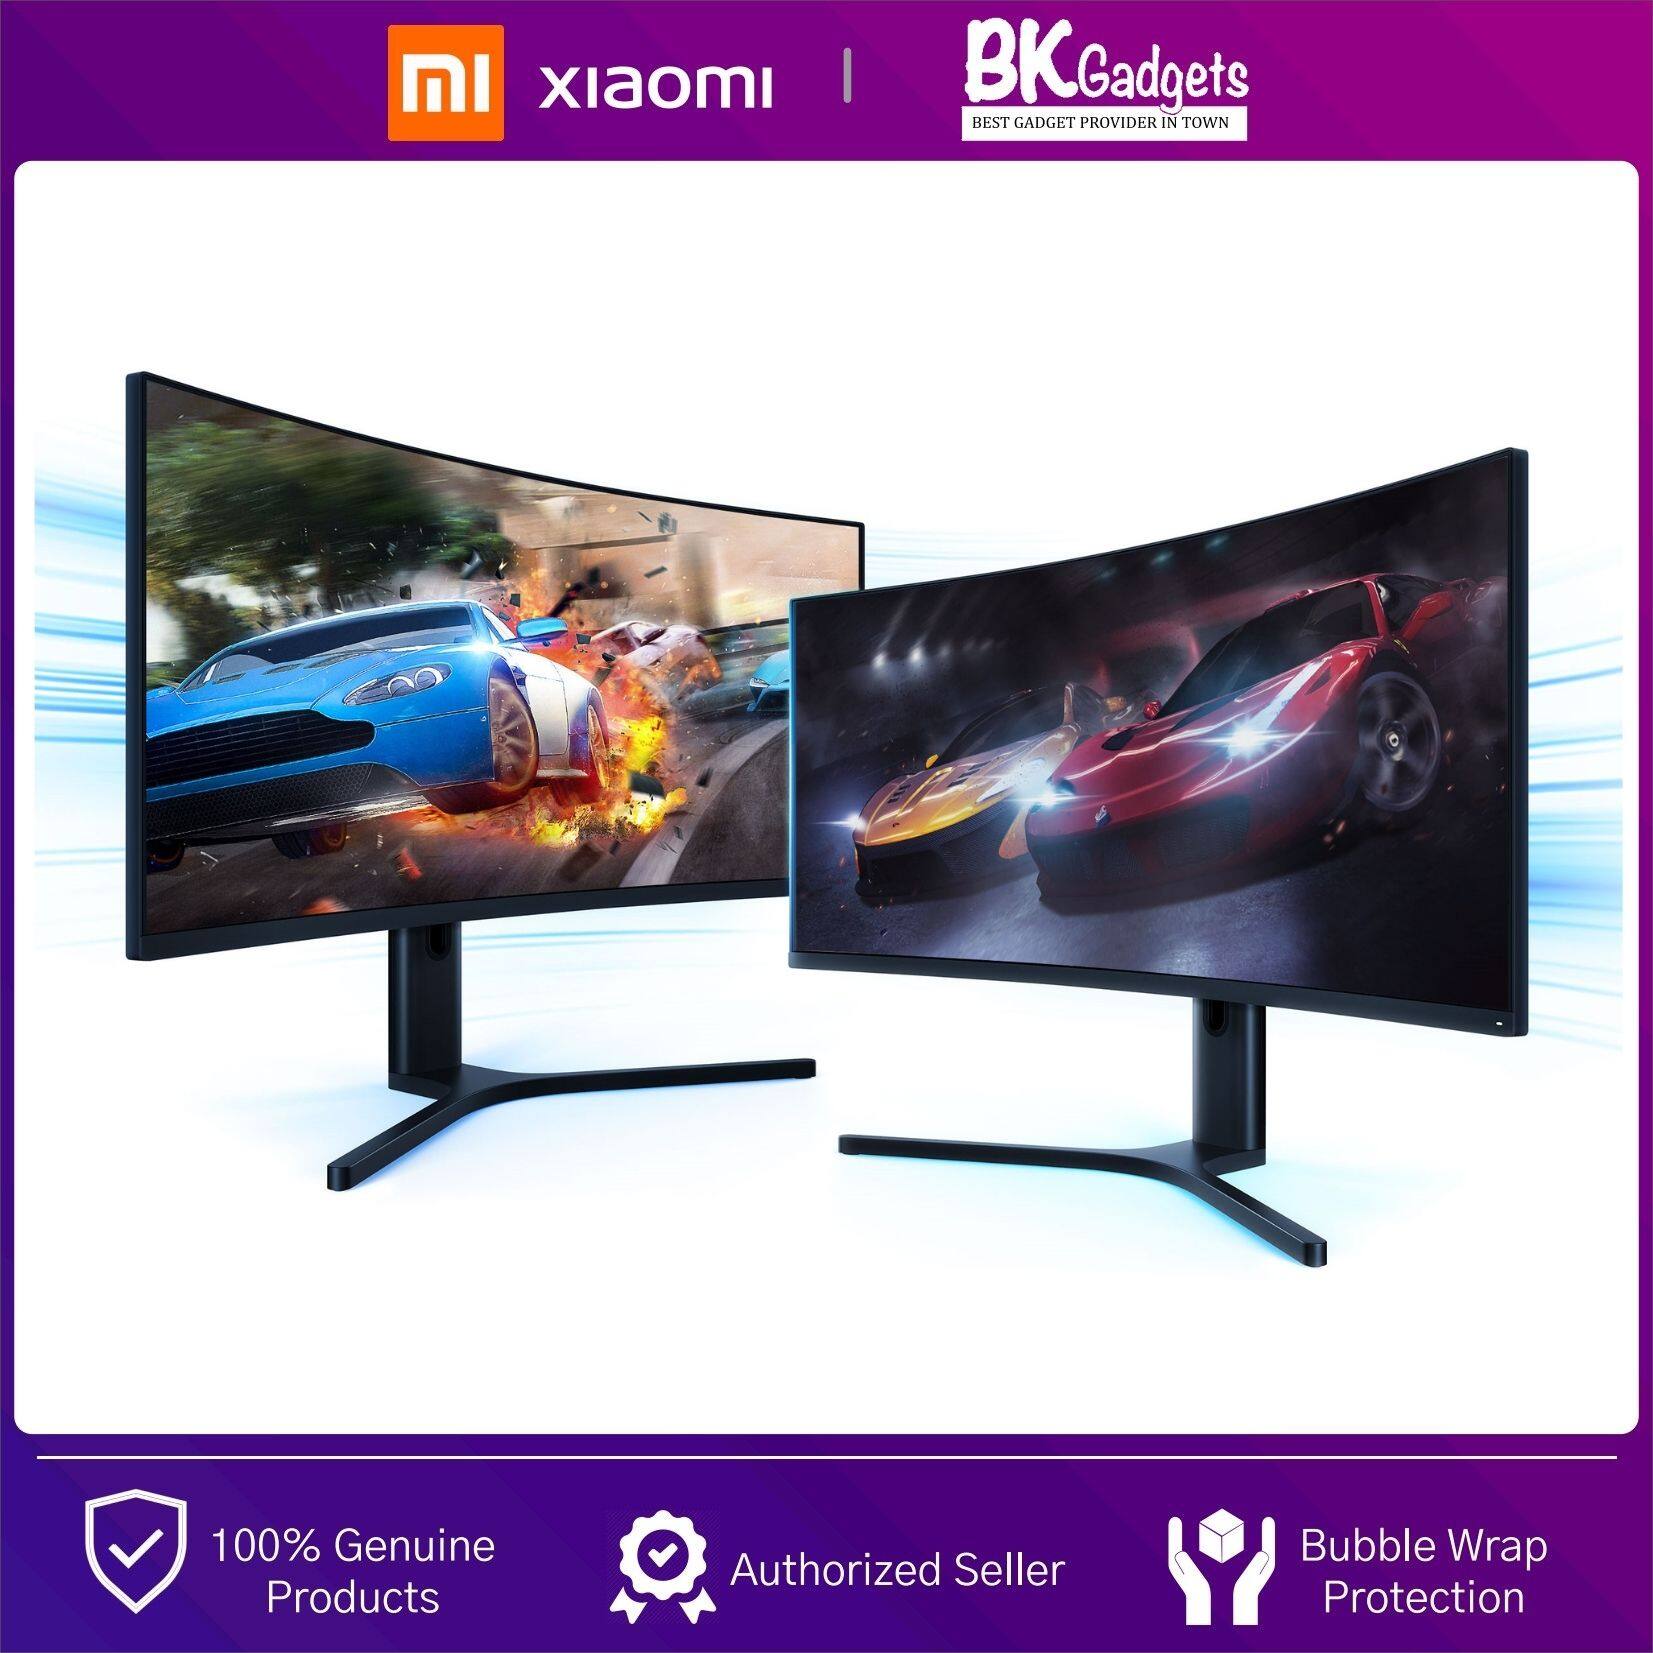 XIAOMI Mi Curved Gaming Monitor 34" - 21:9 UltraWide Panoramic View | 144Hz Refresh Rate | Easy Installation